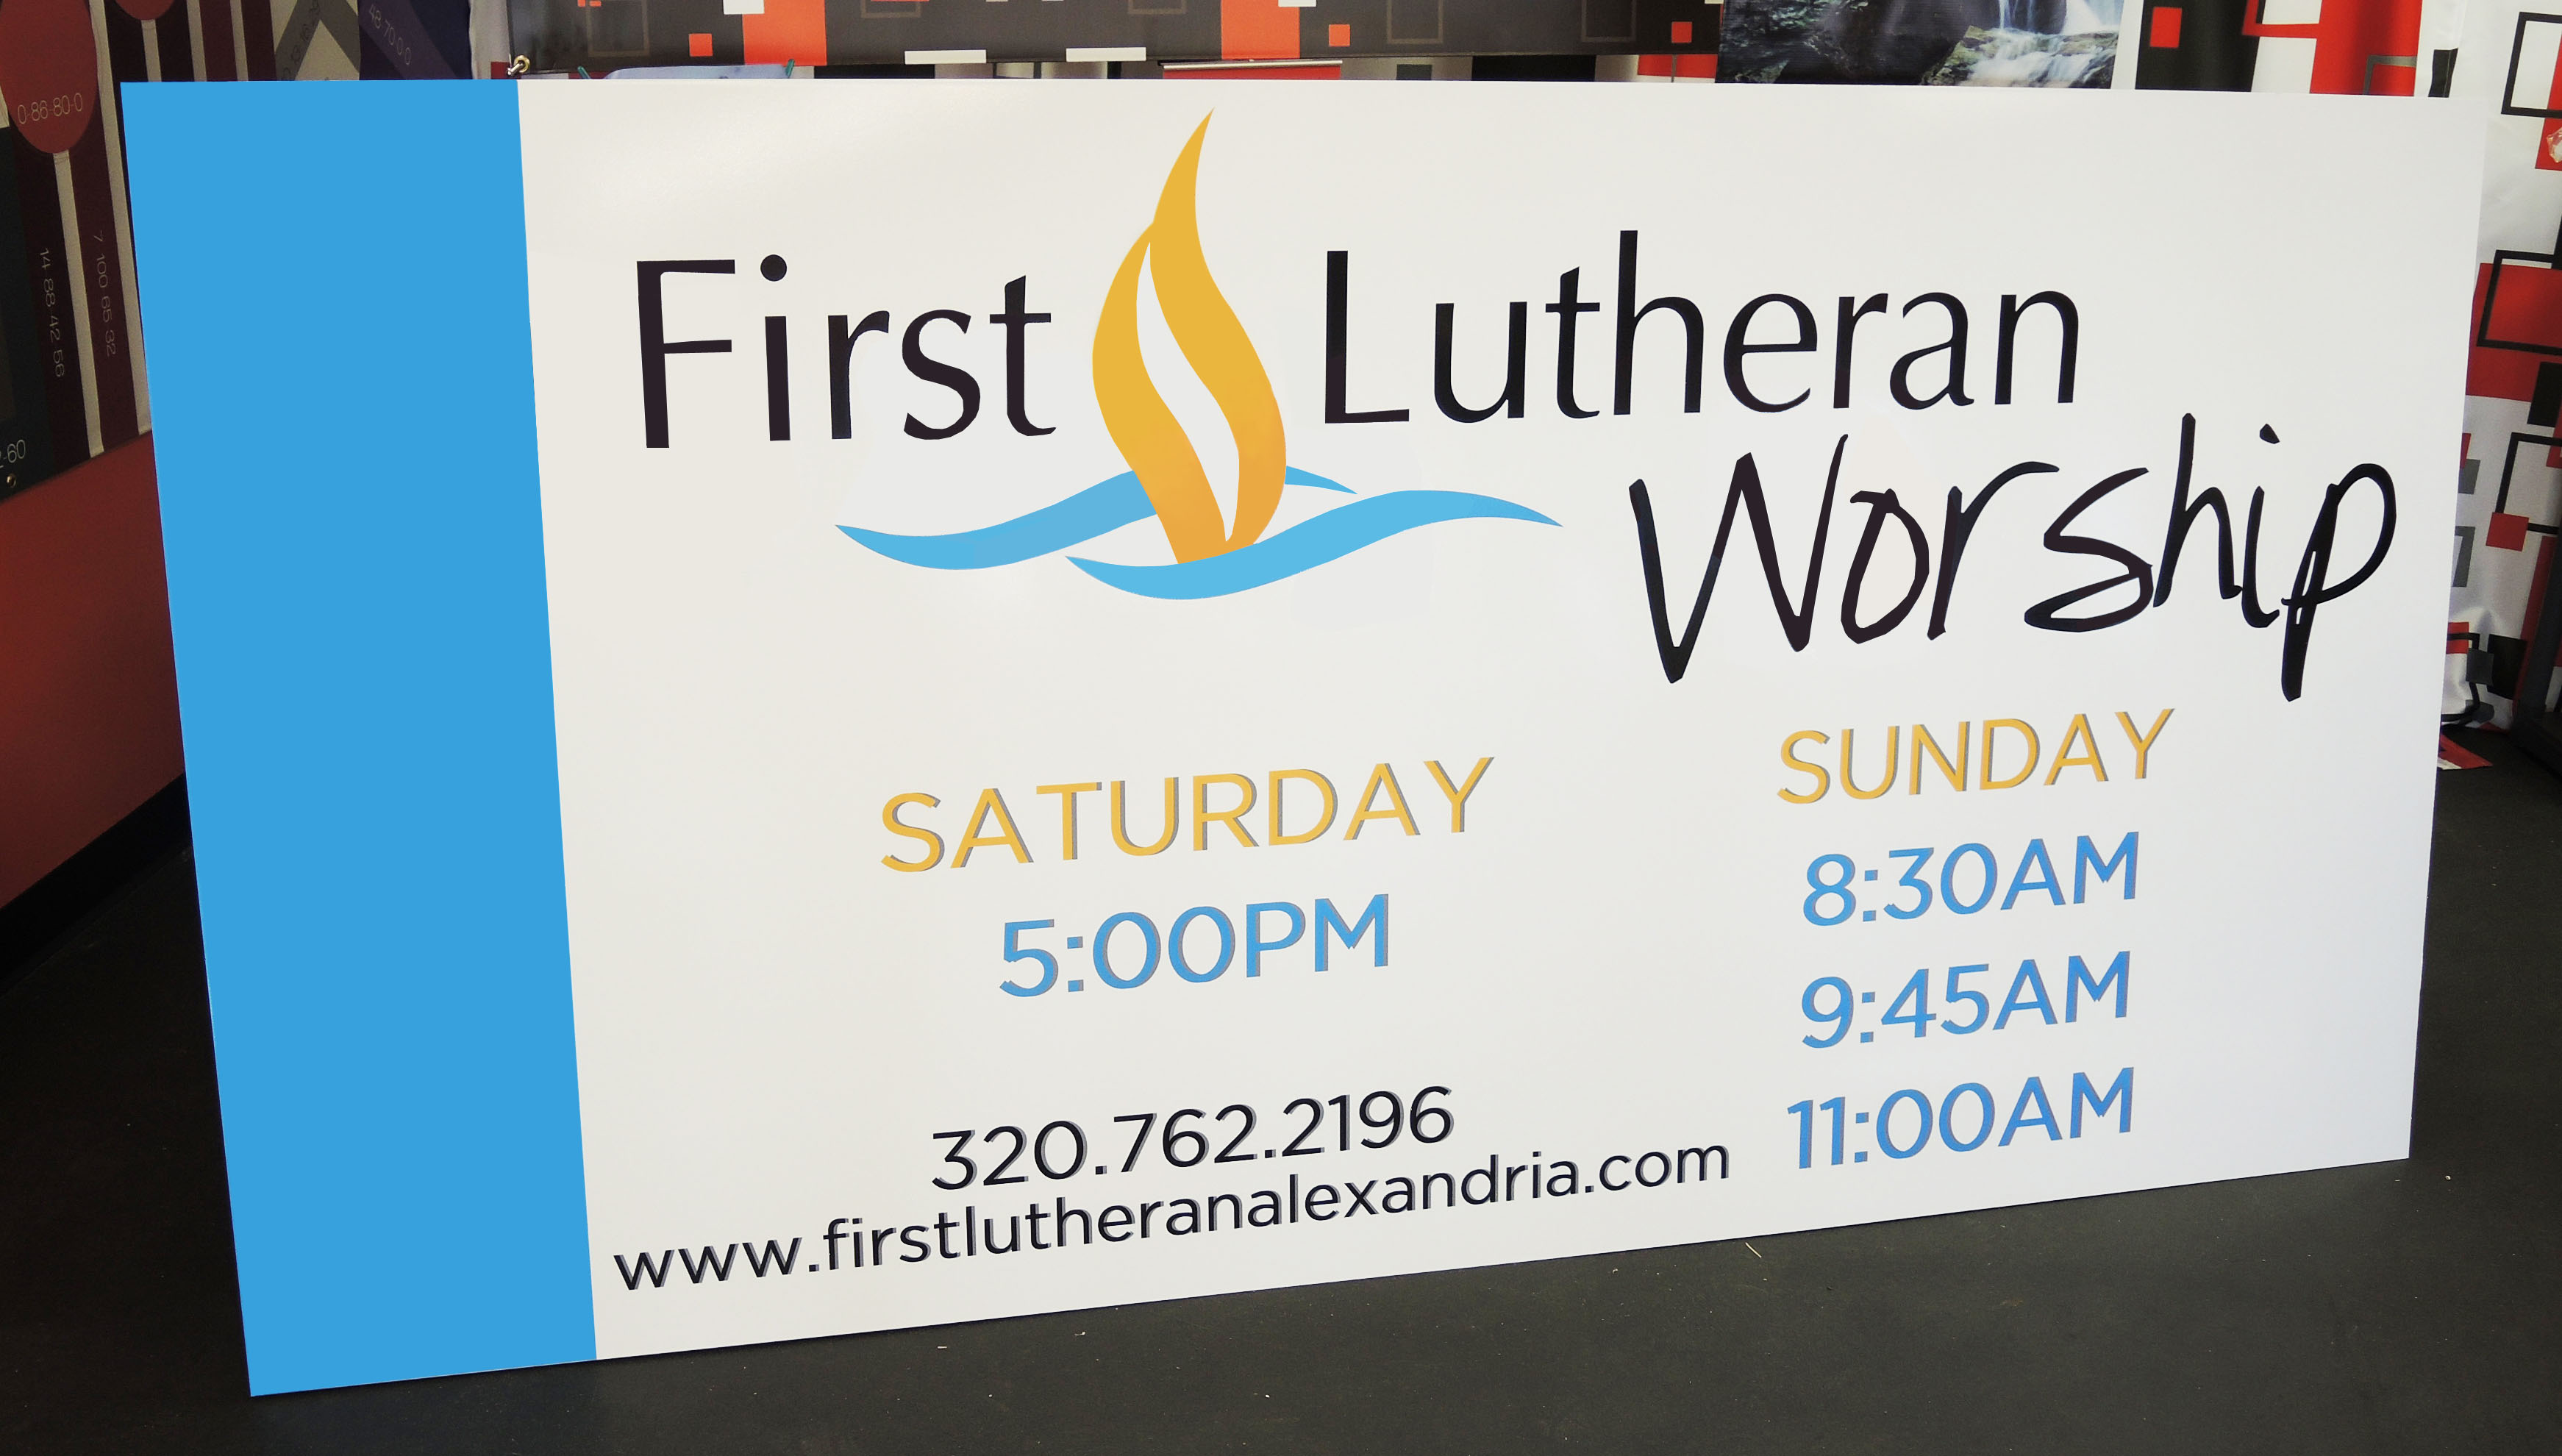 Custom Exterior Church Signs from Signmax